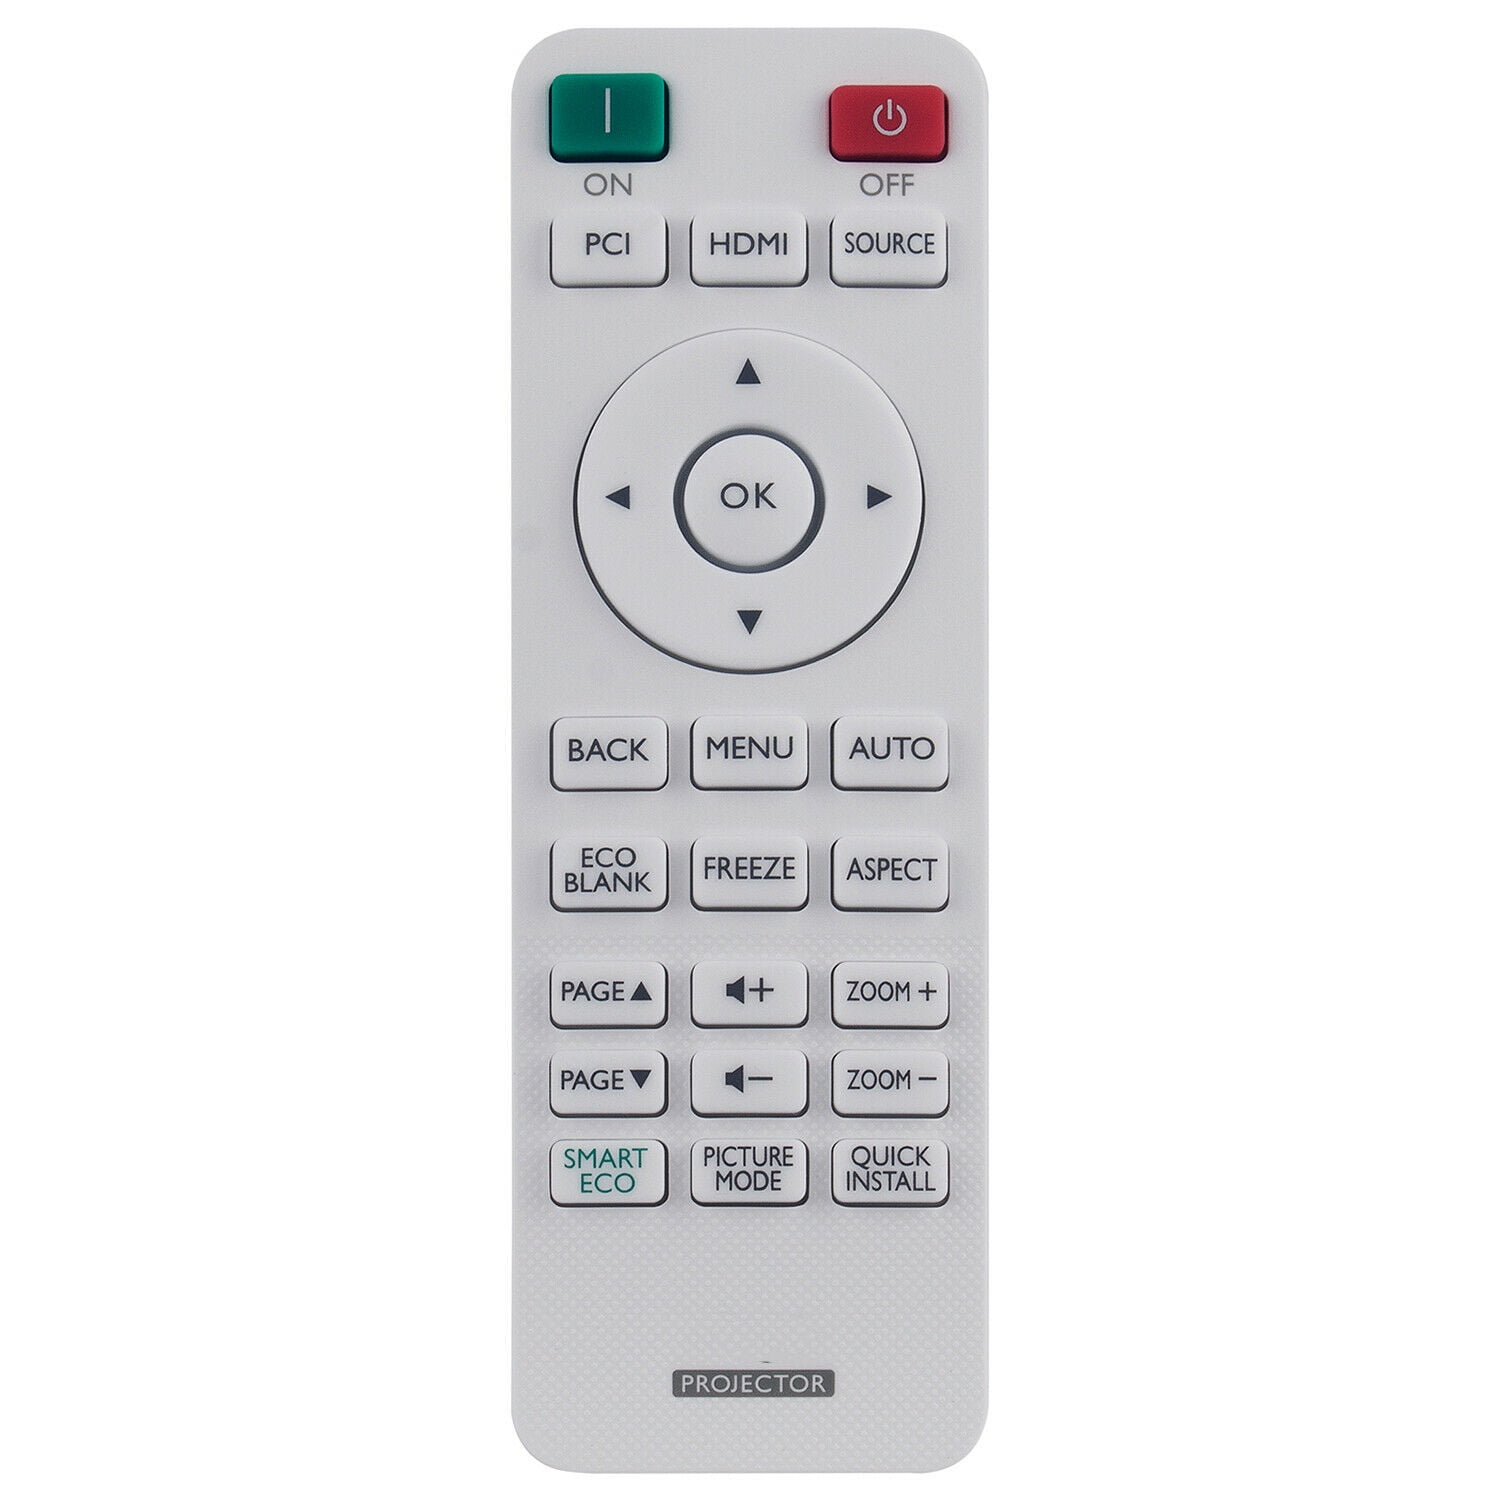 MX710 MP514 MP523 MP515ST MP624 MP24 MP625 MP720P MP626 Projector World of Remote Controls General Universal Compatible Replacement Projector Remote Control Fit for Benq MX613ST MX615 